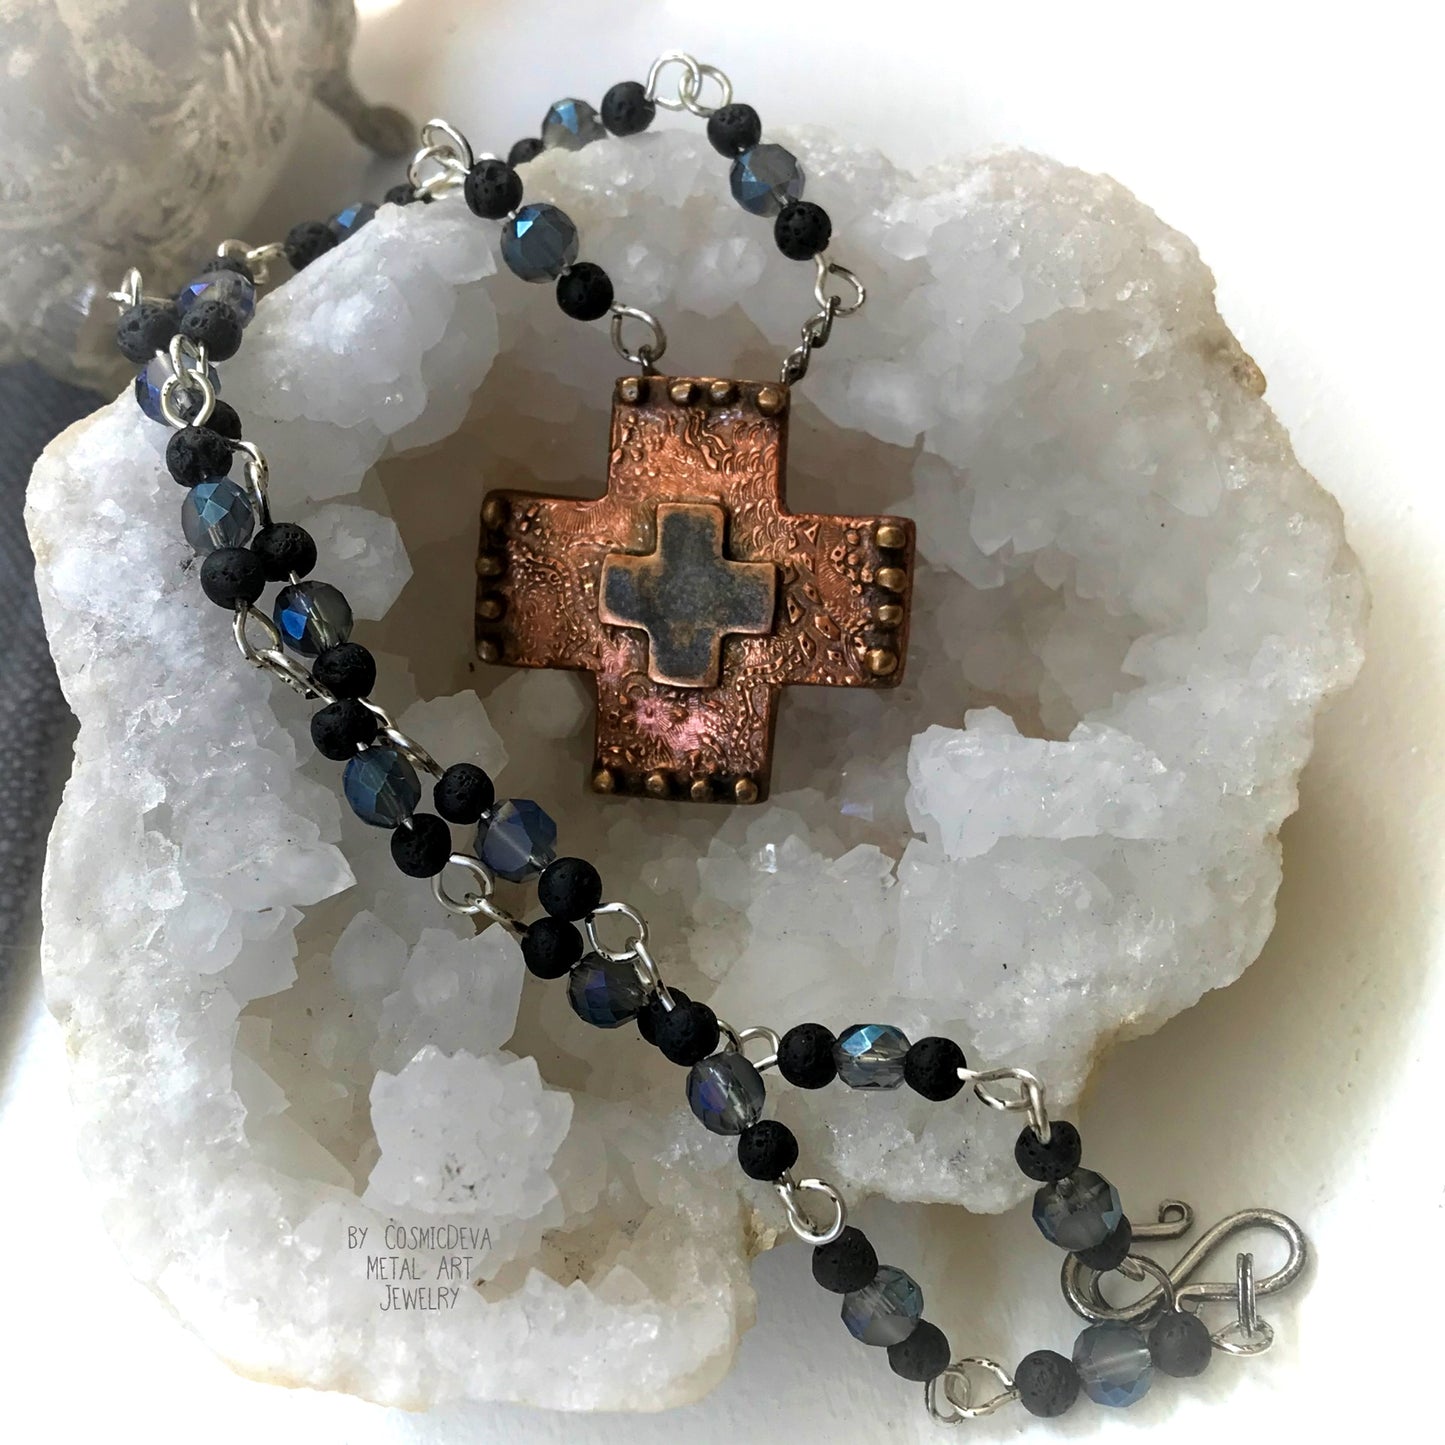 Adorn your faith with this beautiful Copper Cross Rosary Necklace. Handcrafted with love, this necklace features a solid pure copper cross pendant draped over a stunning rosary of .925 sterling silver-plated wire and shimmering blue Czech beads with petite black lava beads. The perfect choice for those seeking a boho-inspired way to wear their faith proudly. - CosmicDeva